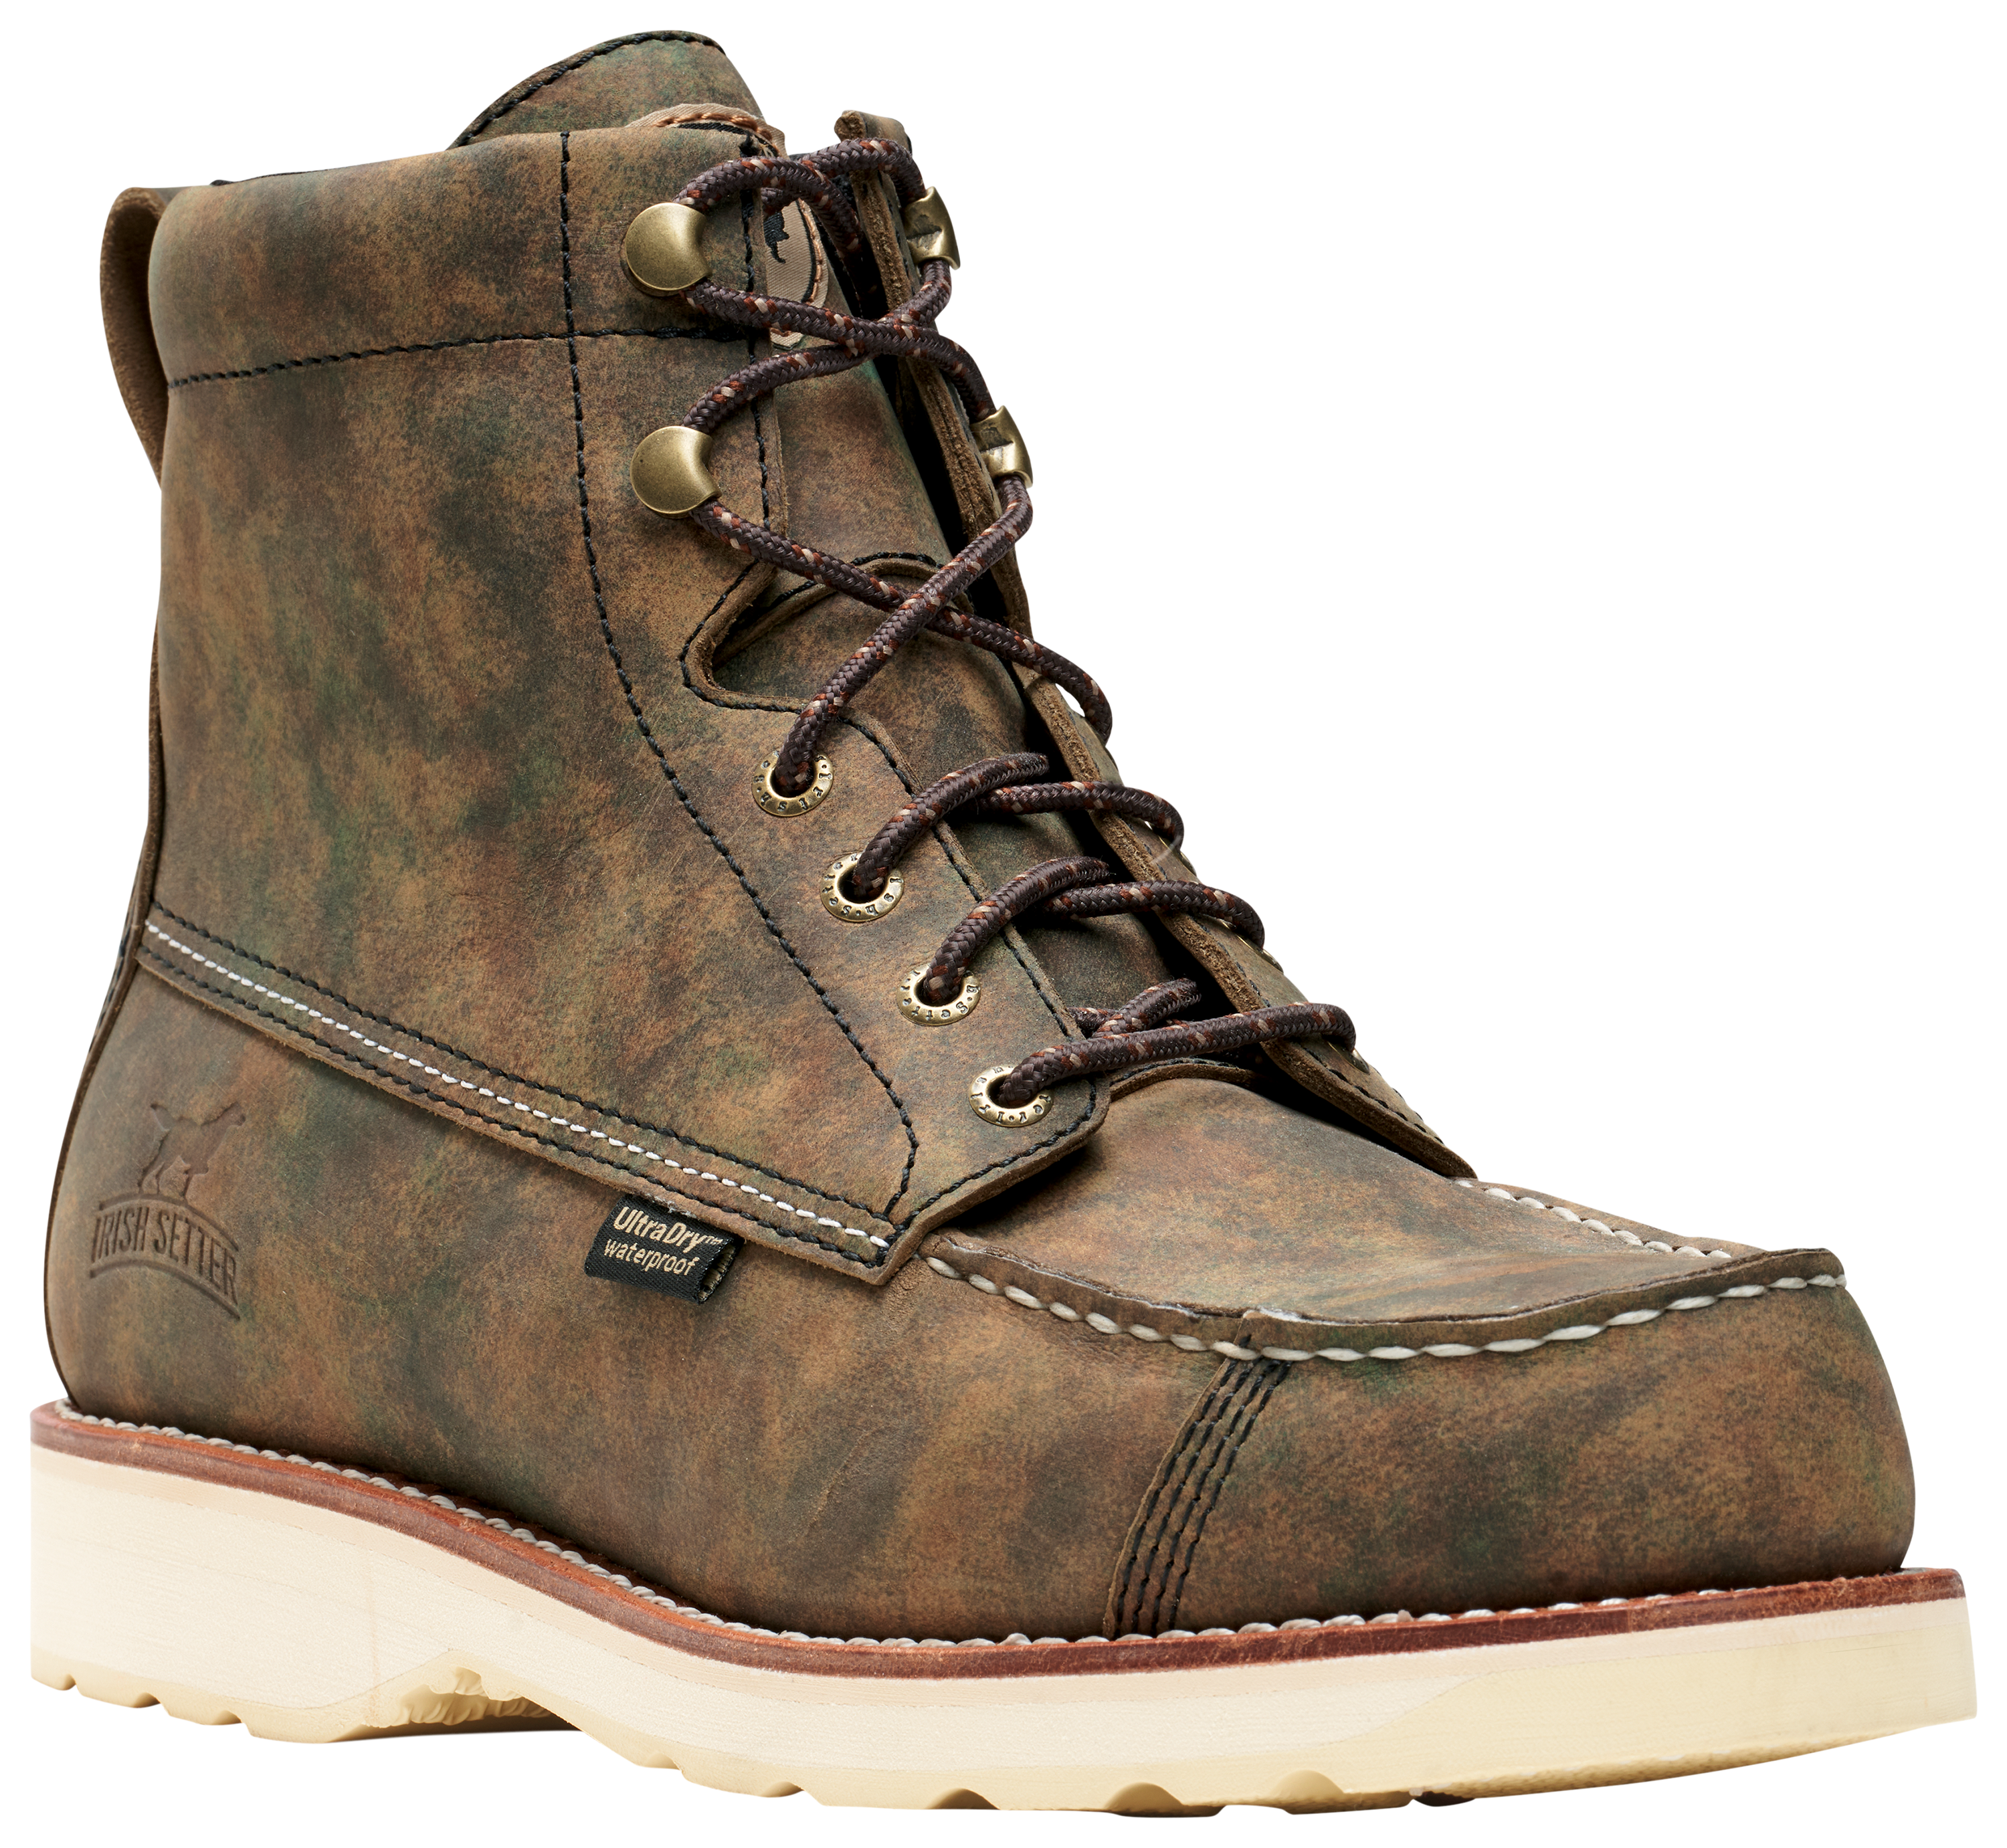 Irish Setter Wingshooter 7 Waterproof Hunting Boots for Men - Earth Camo - 10.5W